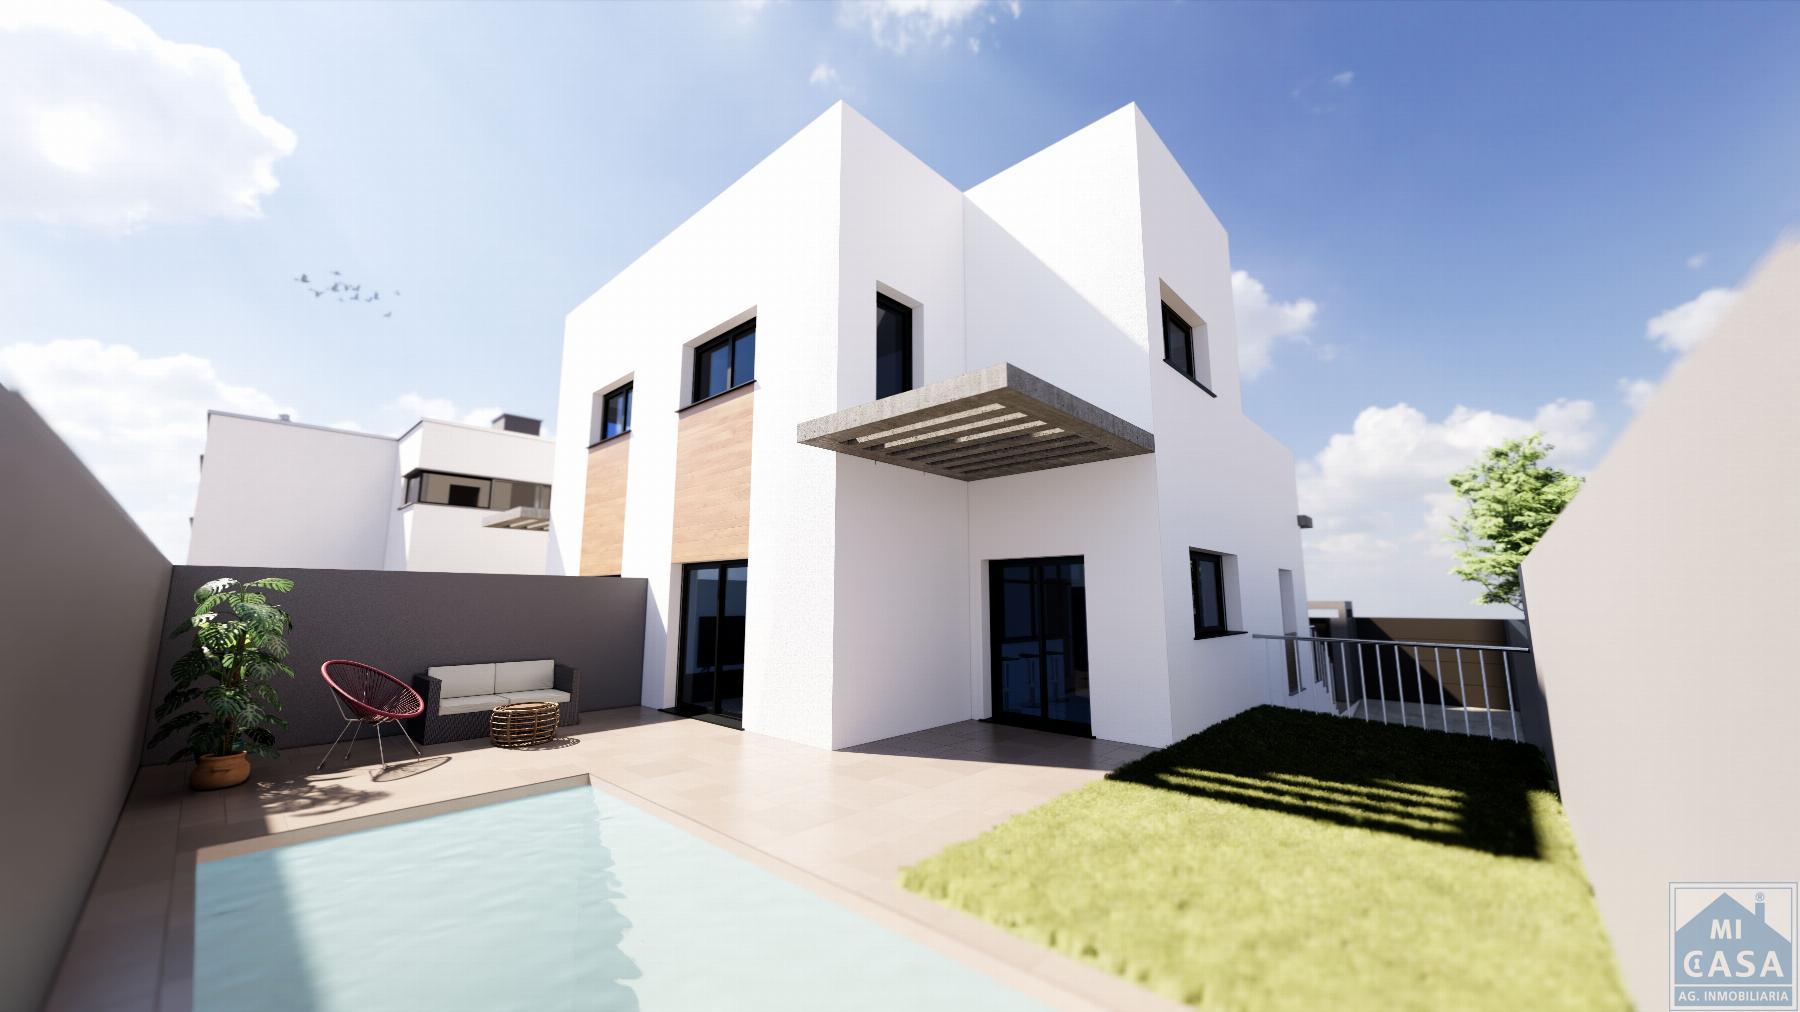 For sale of new build in Mérida